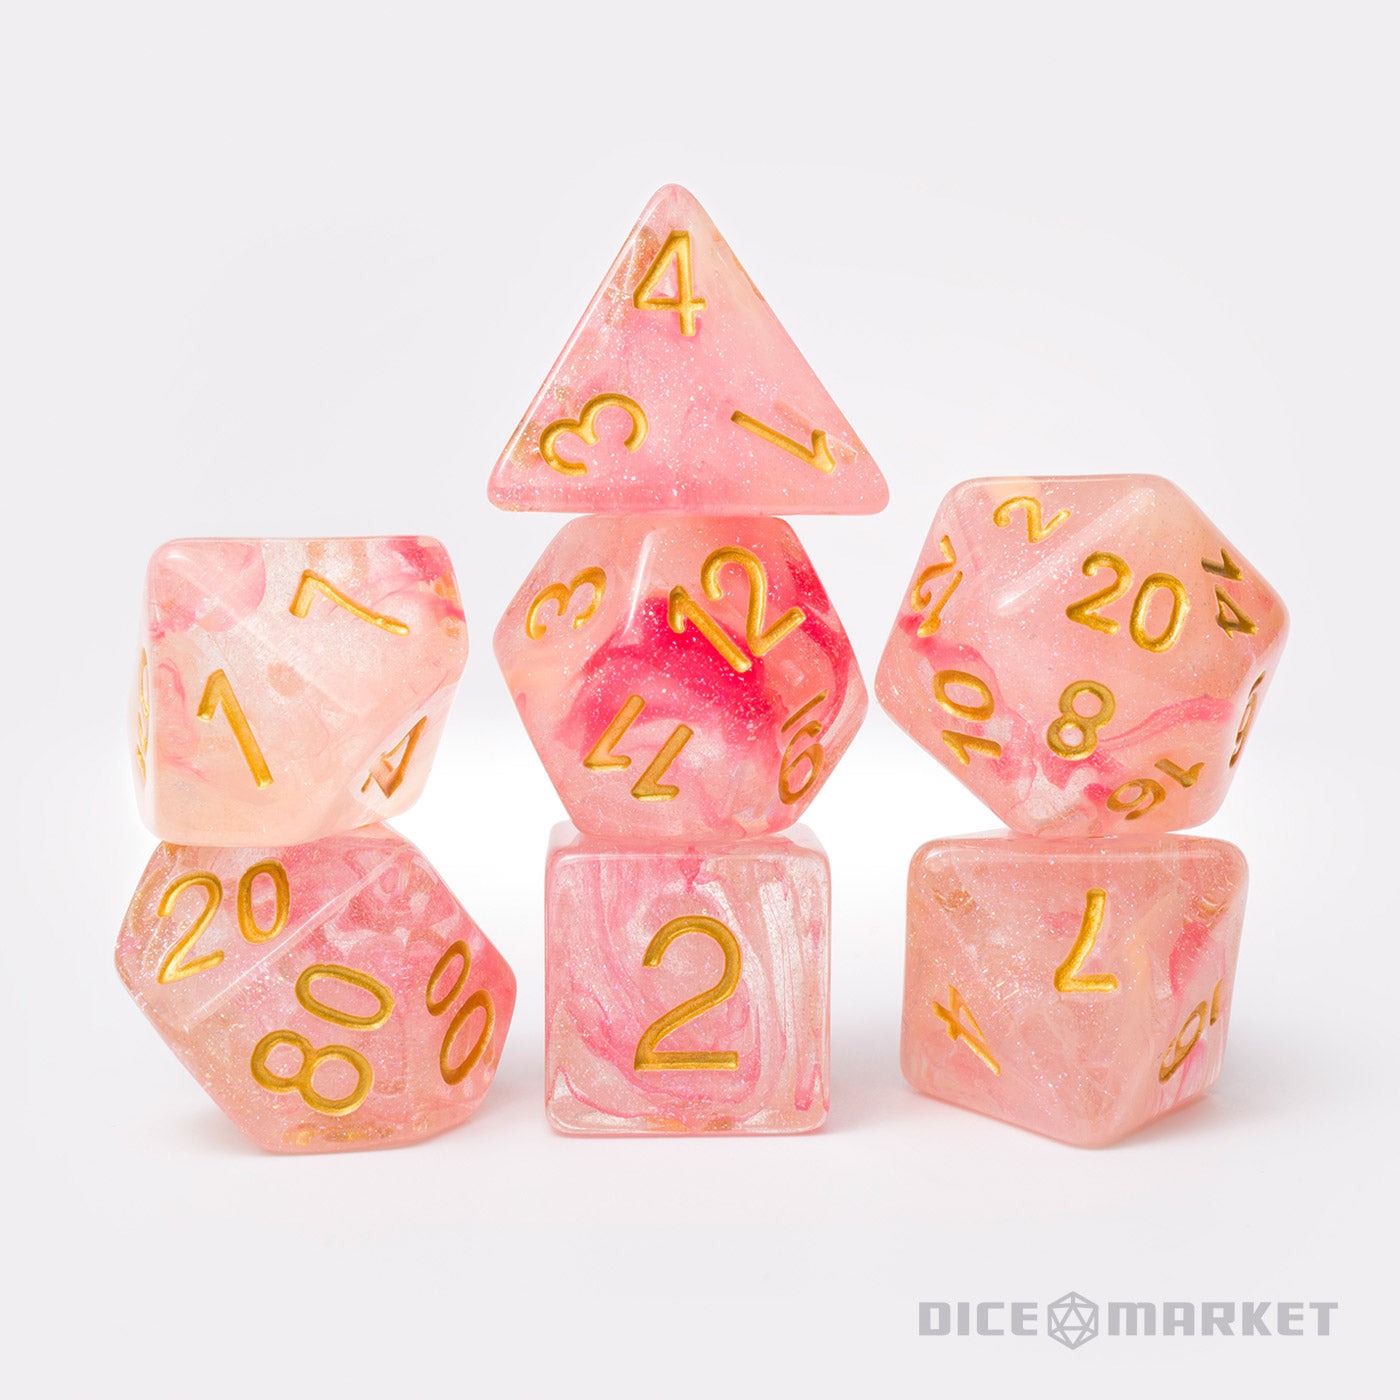 Apricot and Red Swirl Glitter 7pc Polyhedral Dice Set